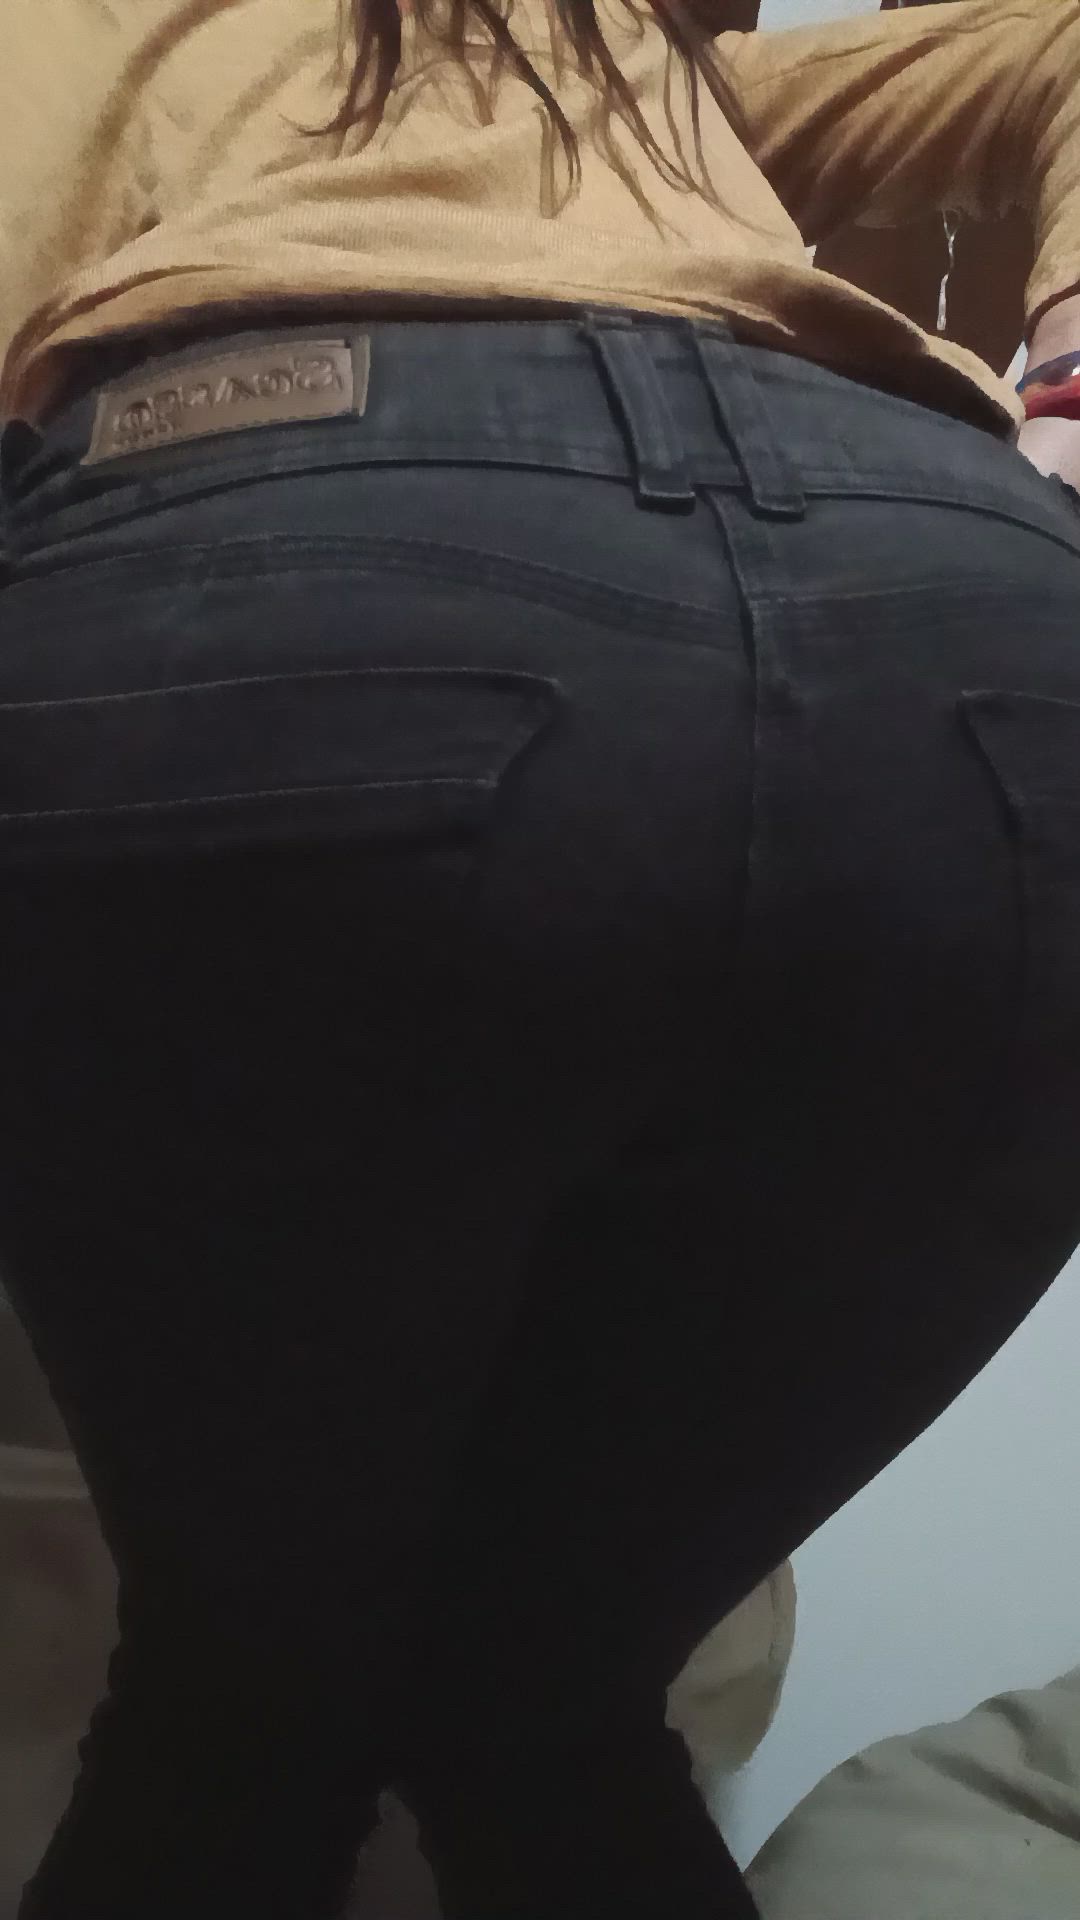 Ass porn video with onlyfans model ofbyjess <strong>@jess.5</strong>